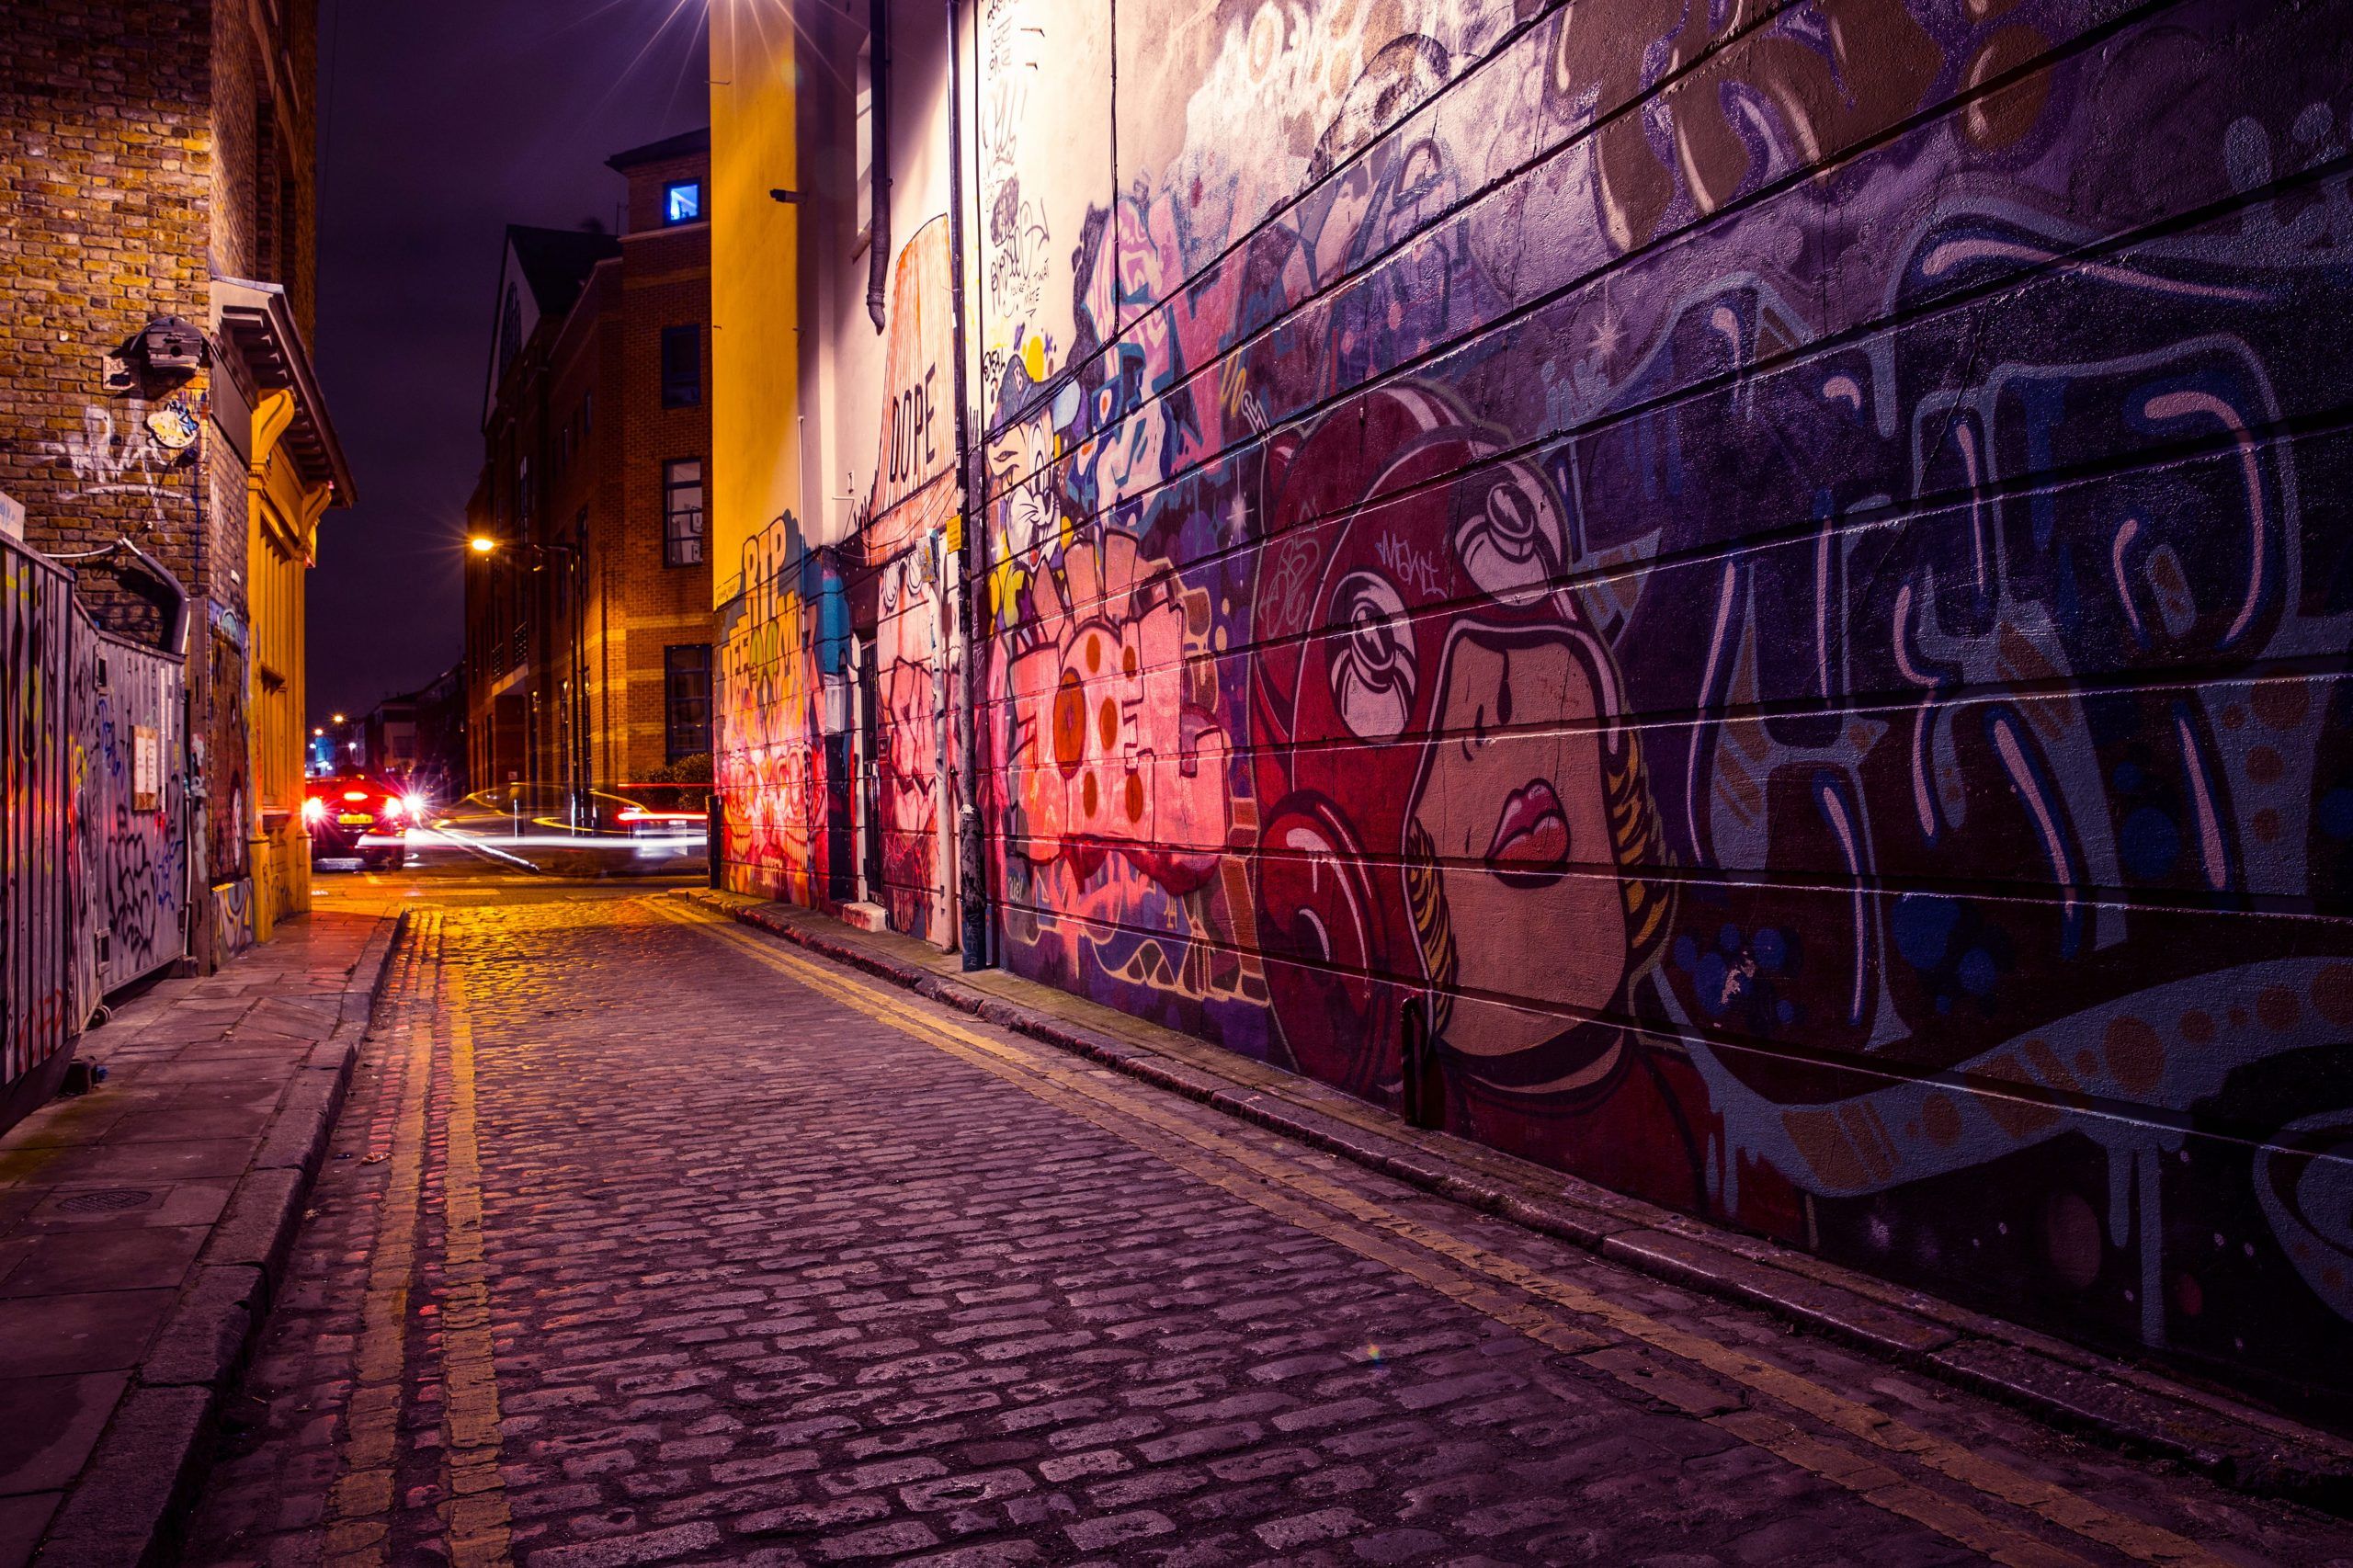 A street at night with a wall covered in graffiti - Street art